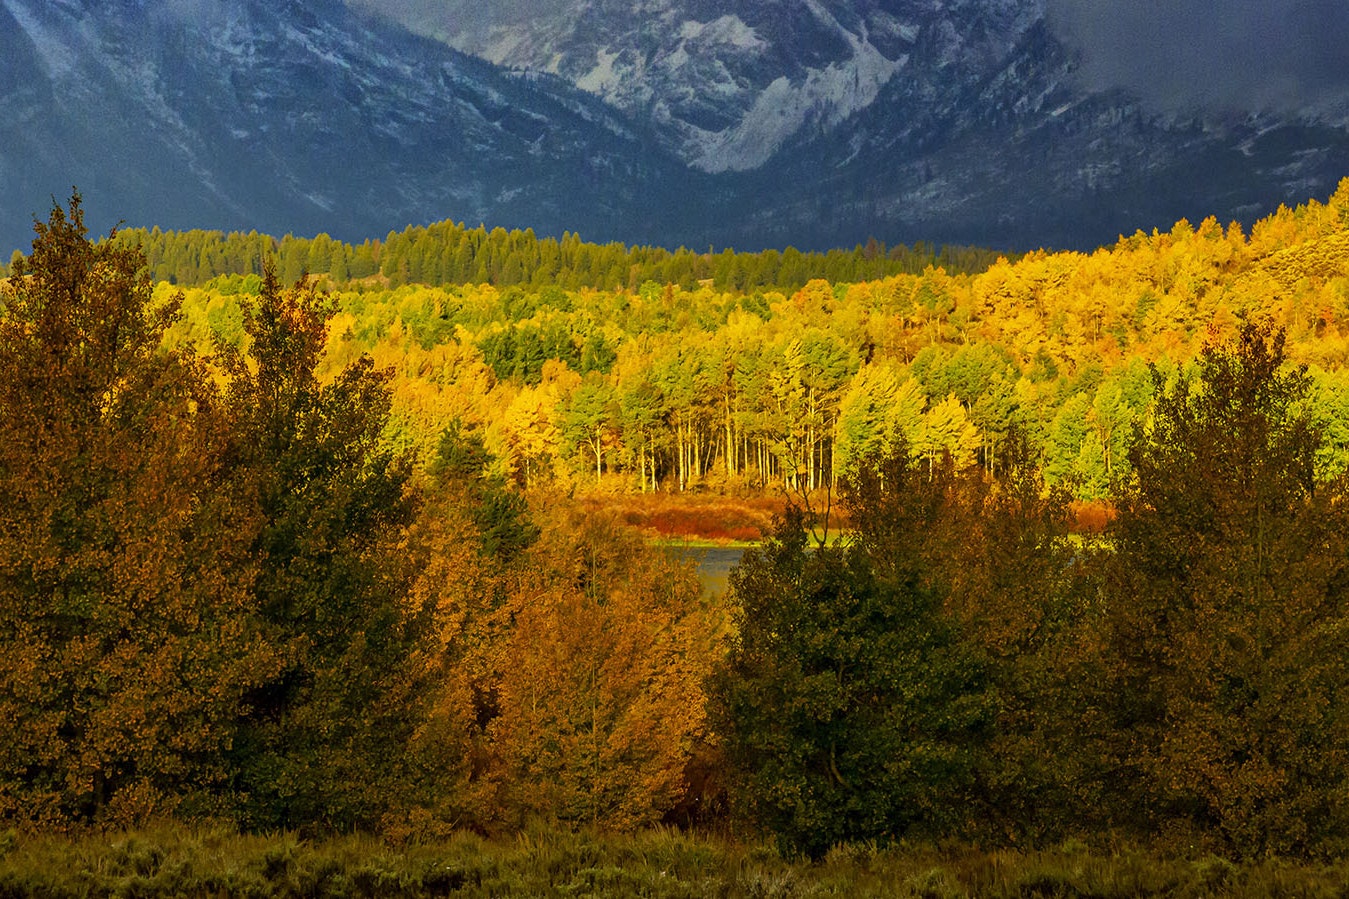 Fall in full effect in Grand Teton National Park in Wyoming.